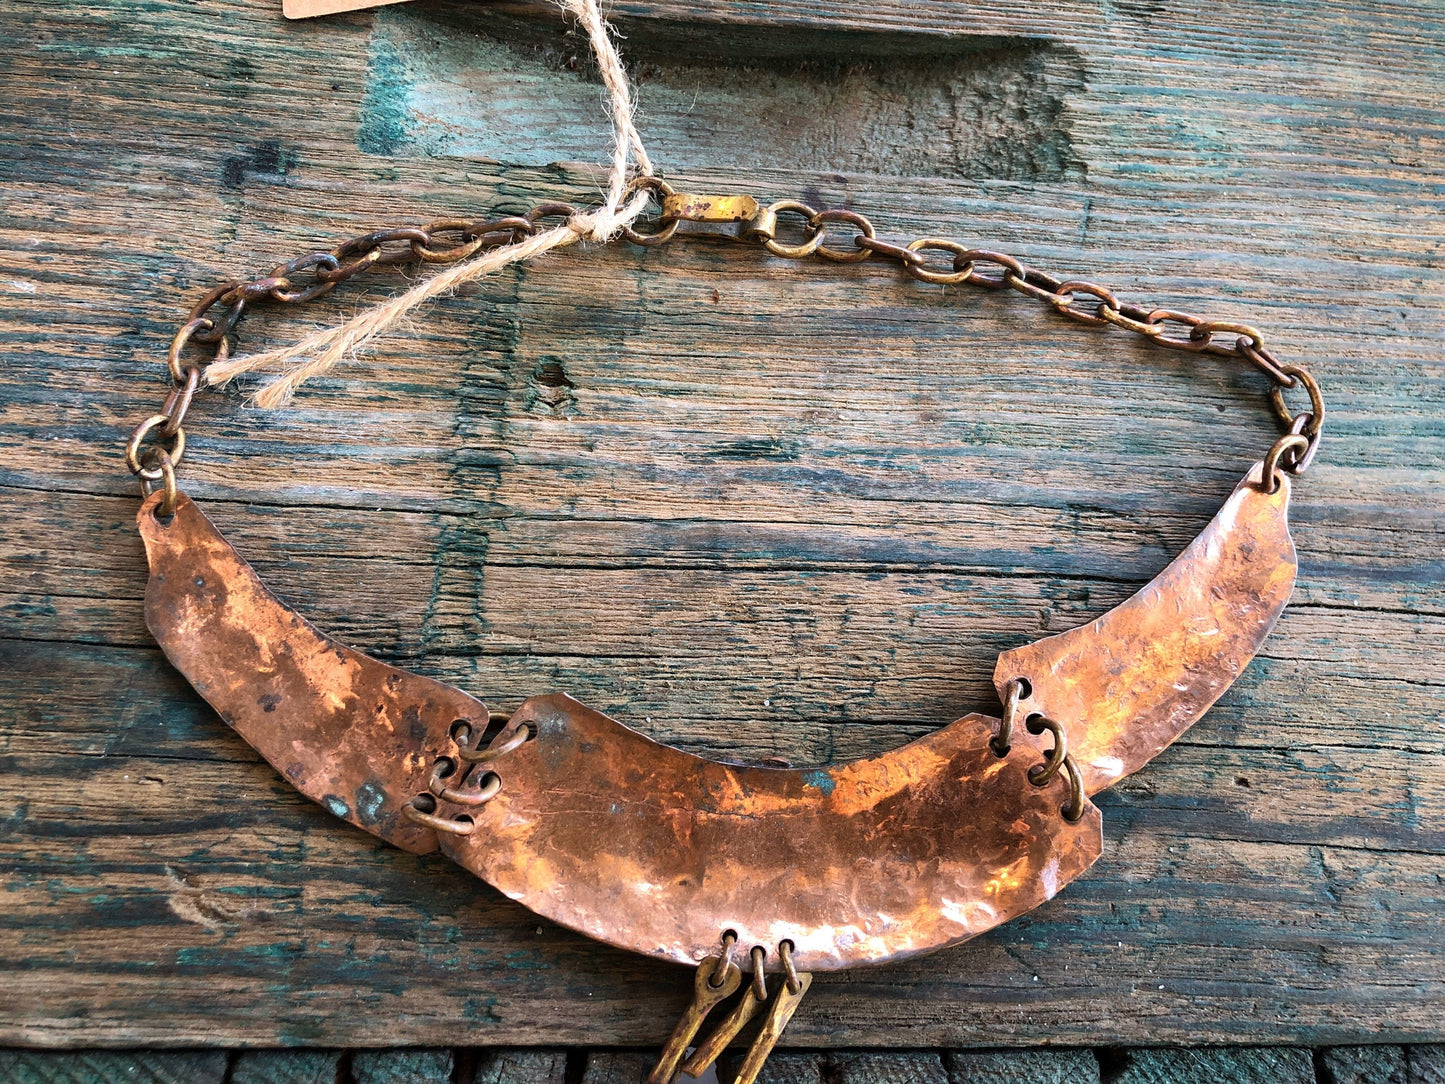 Mexican tribal hand hammered copper and brace tribal mask and arrow choker necklace